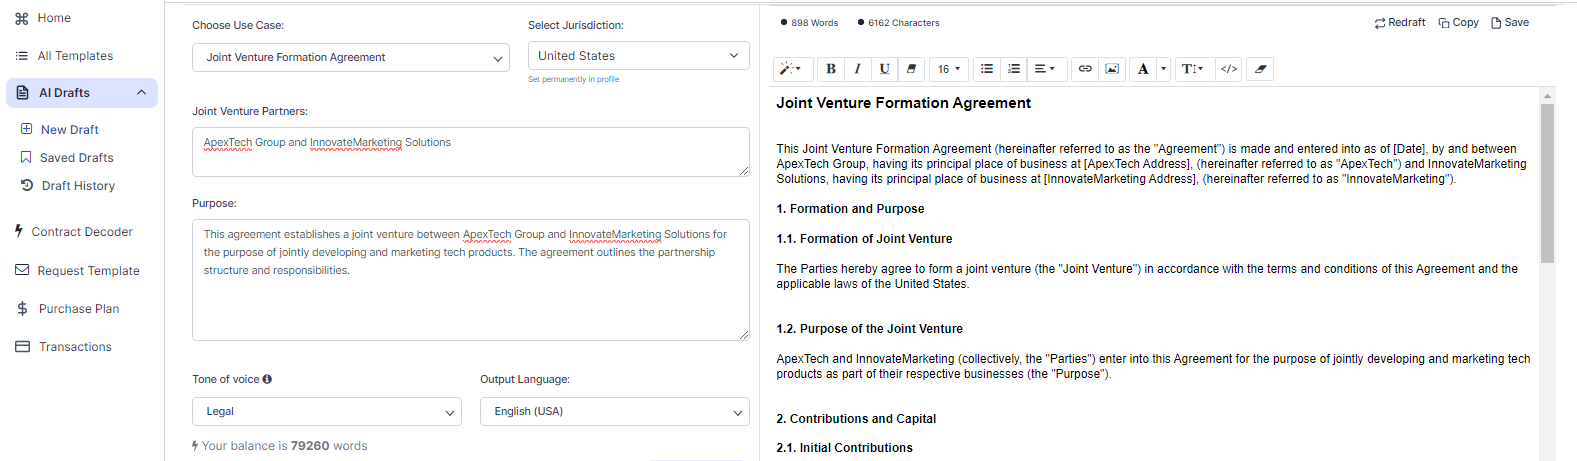 Joint Venture Formation Agreement template